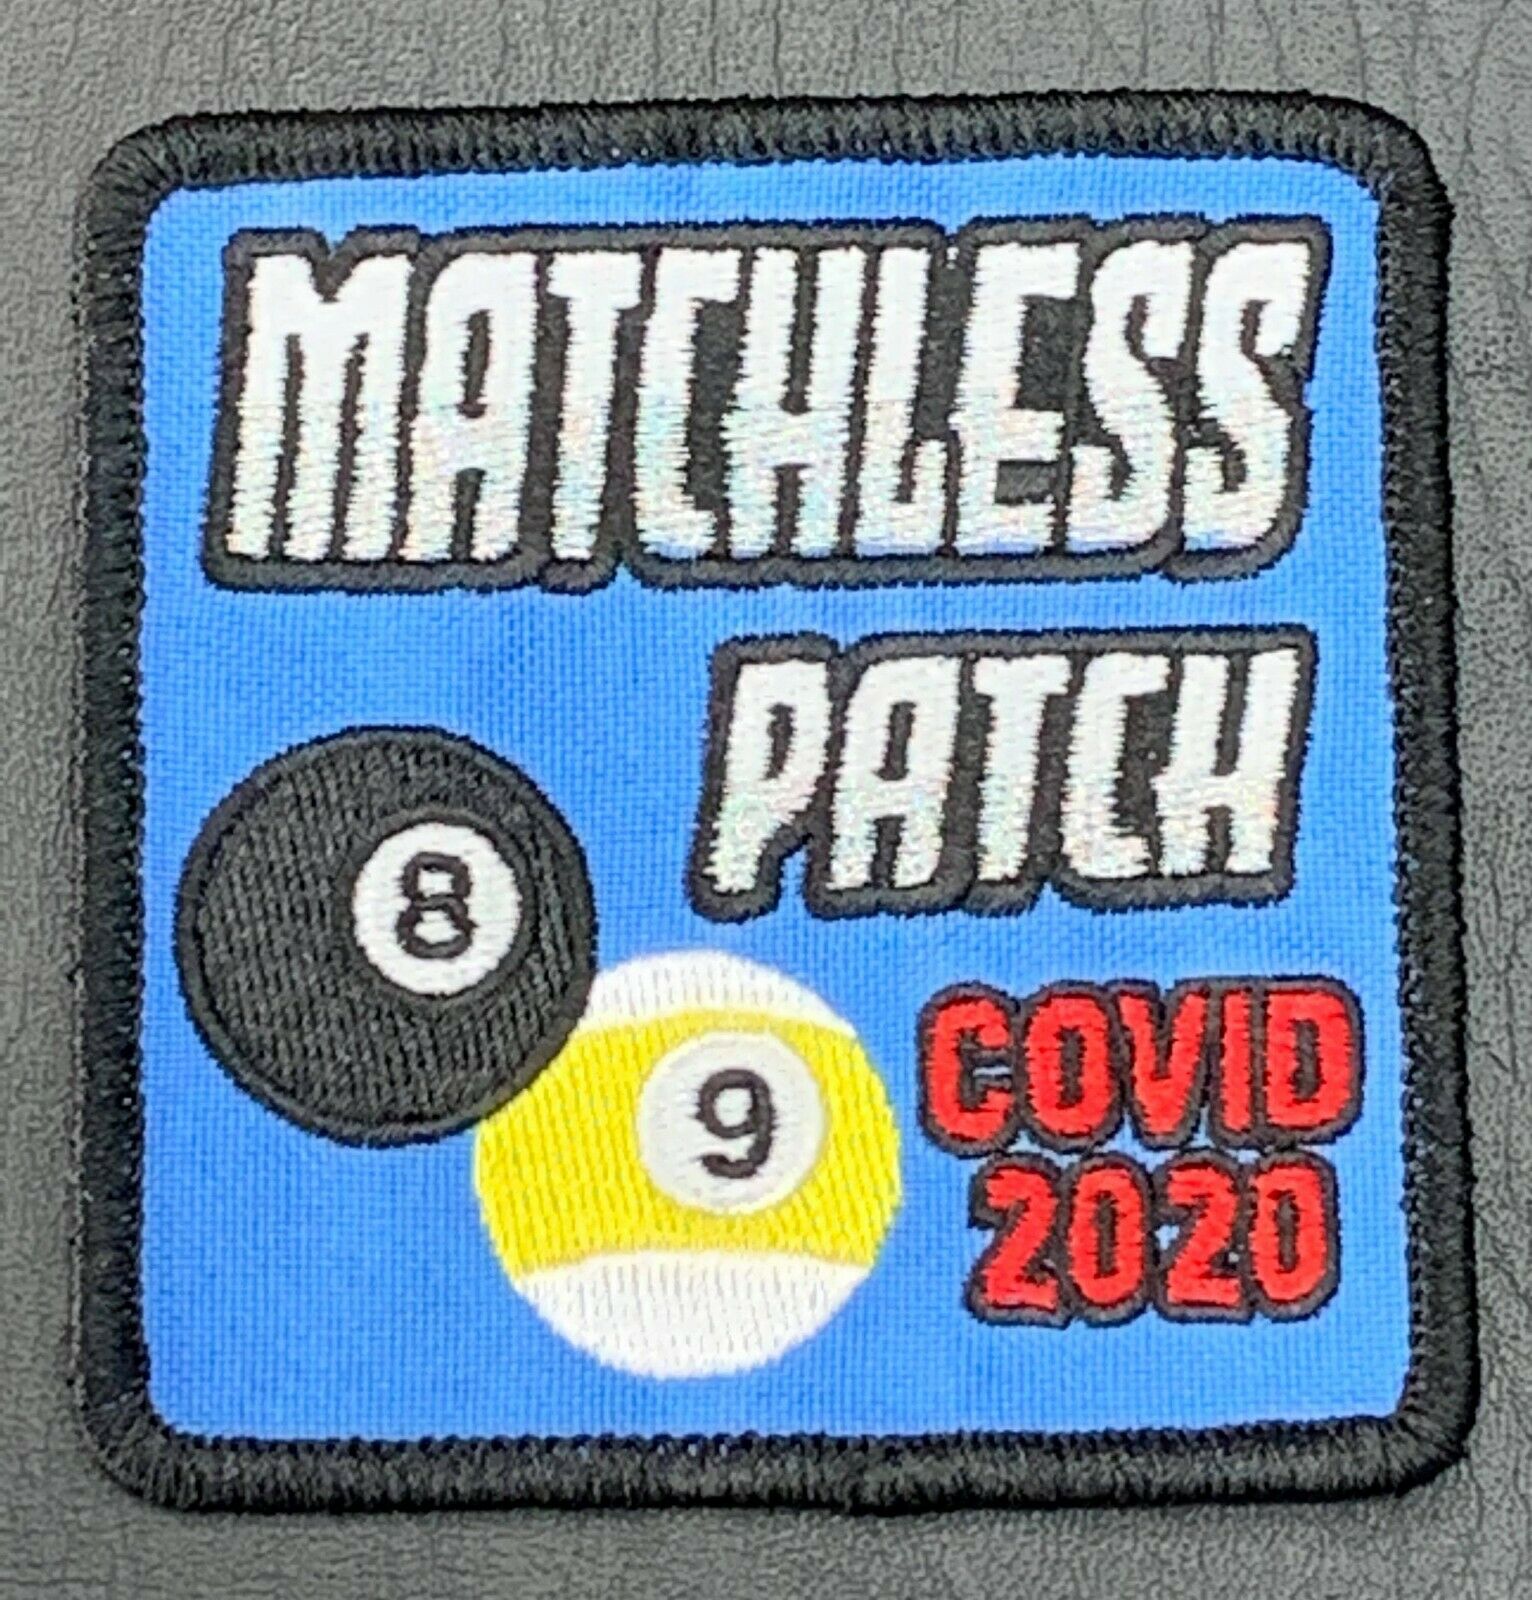 2020 Billiards Pool Matchless Patch 8-ball / 9-ball